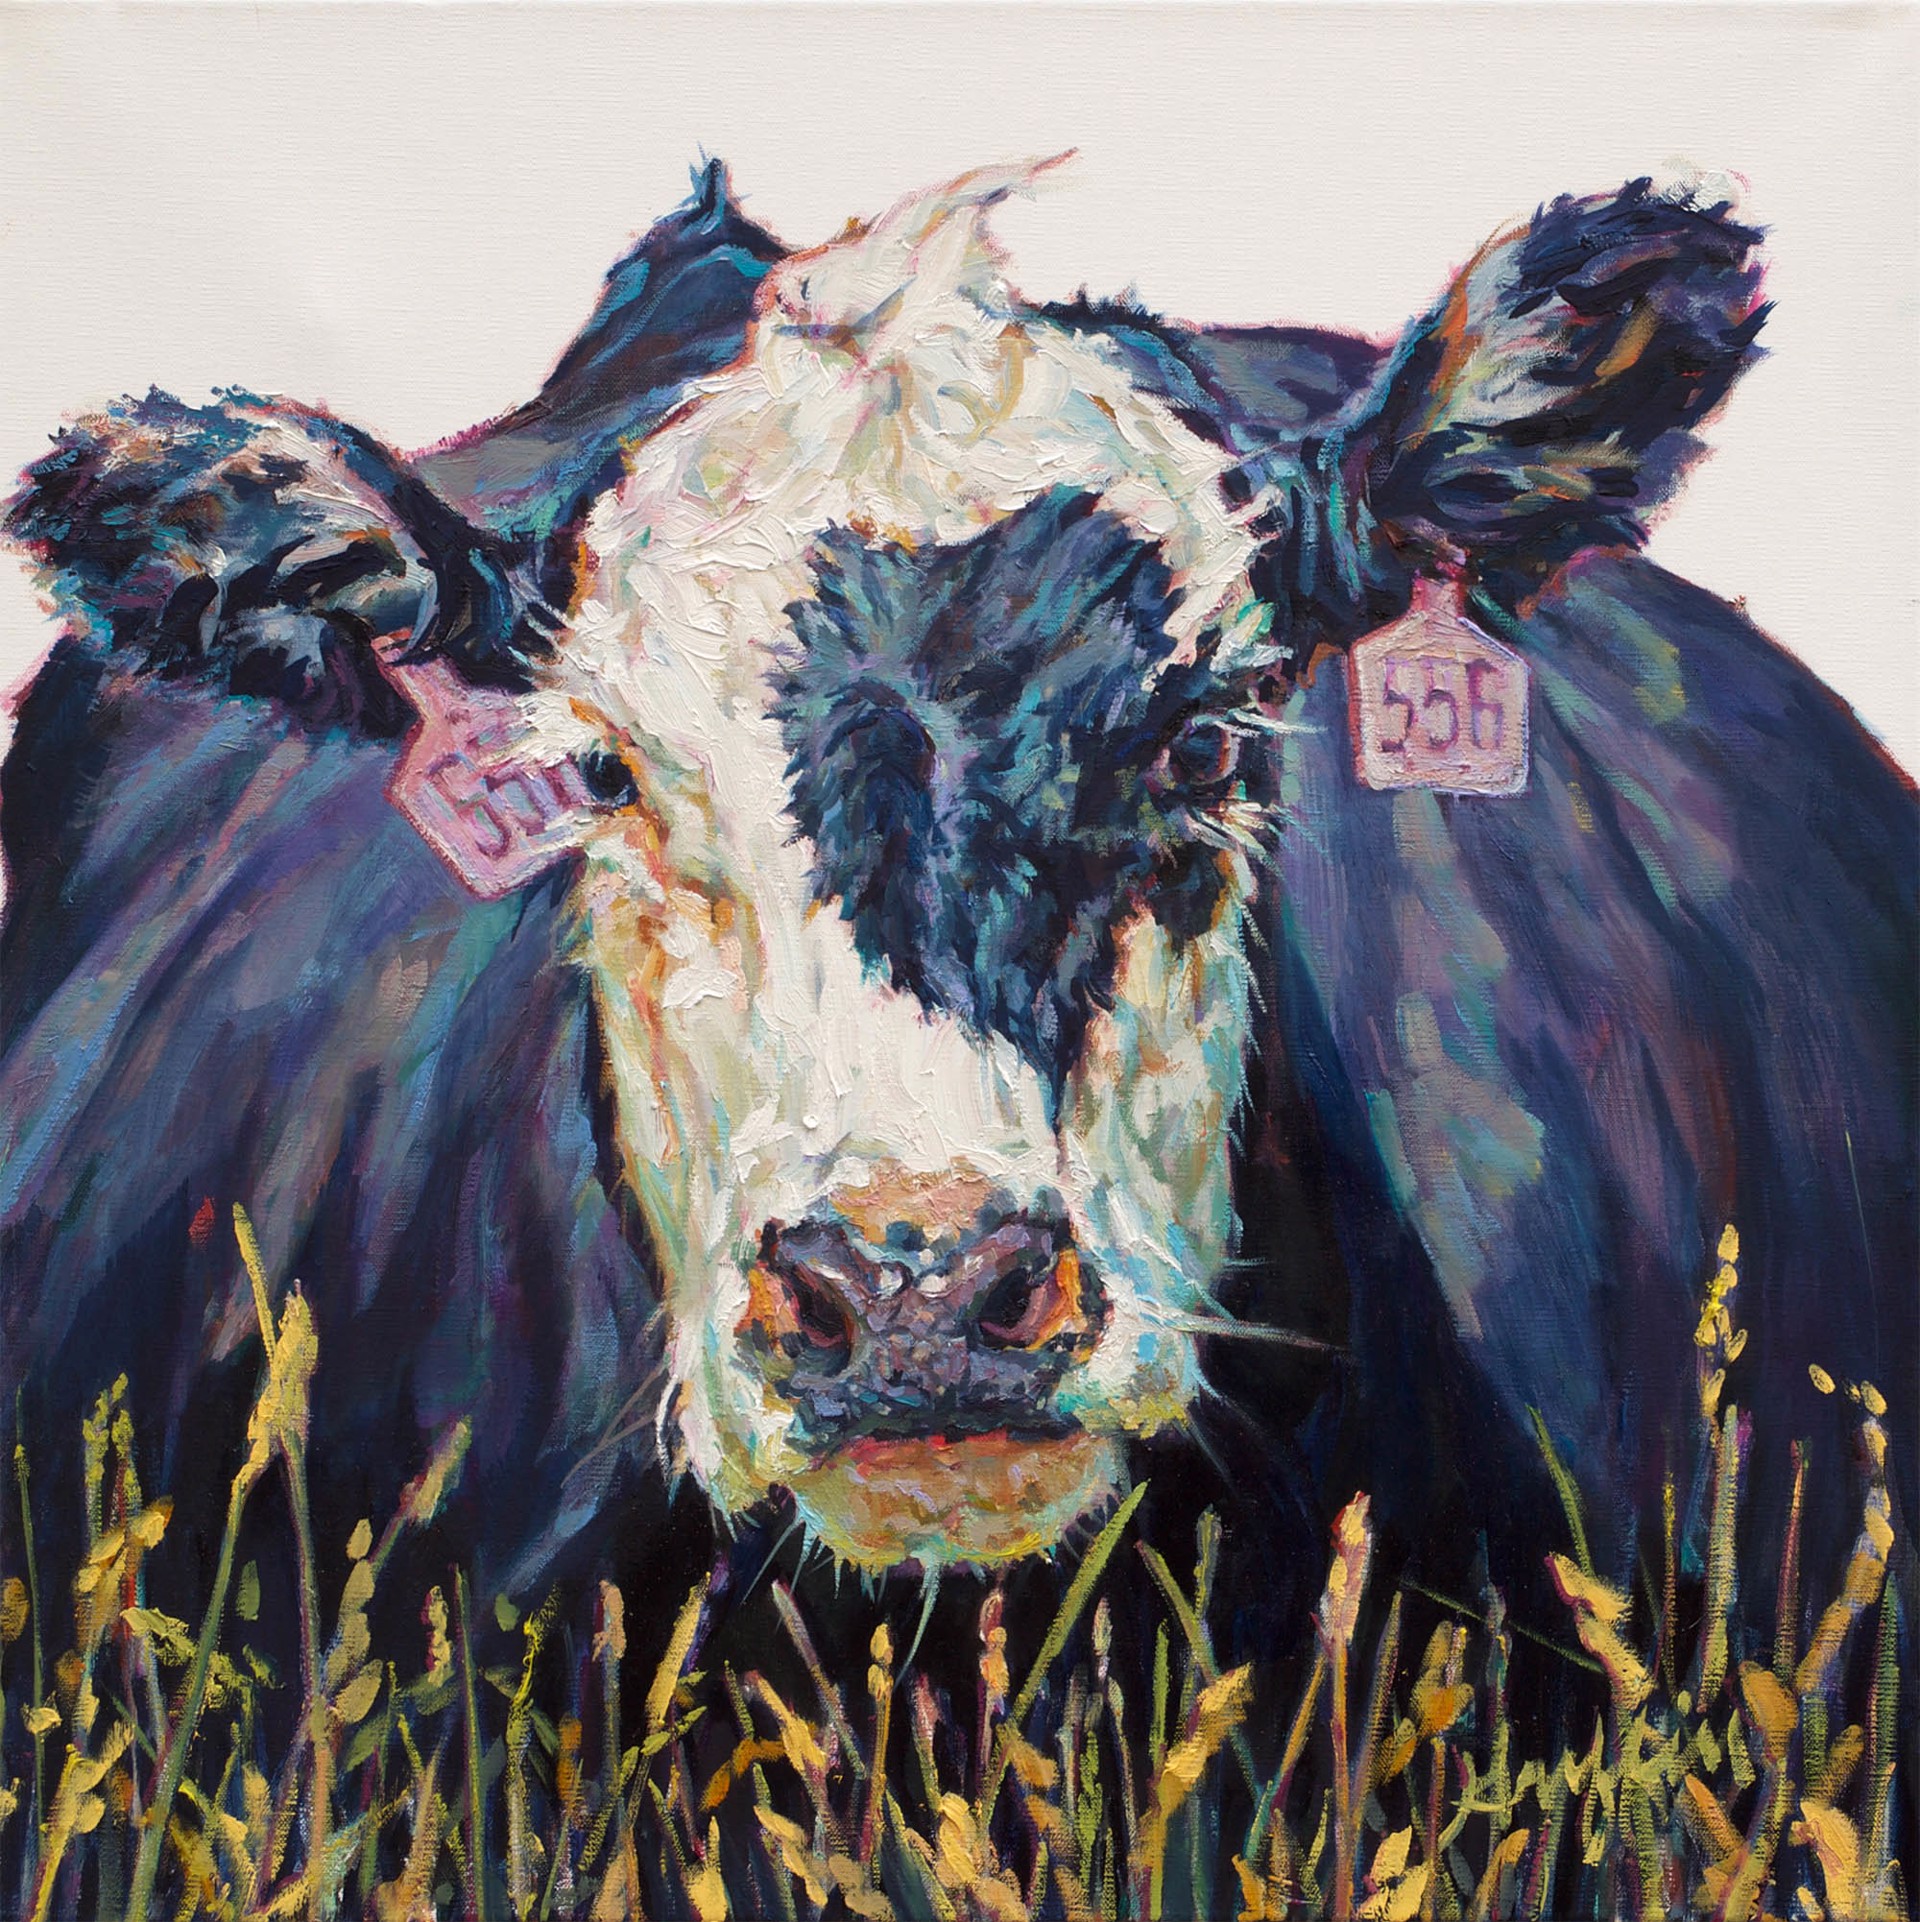 Original Oil Painting Featuring A Black And White Cow With Two Pink Numbered Ear Tags